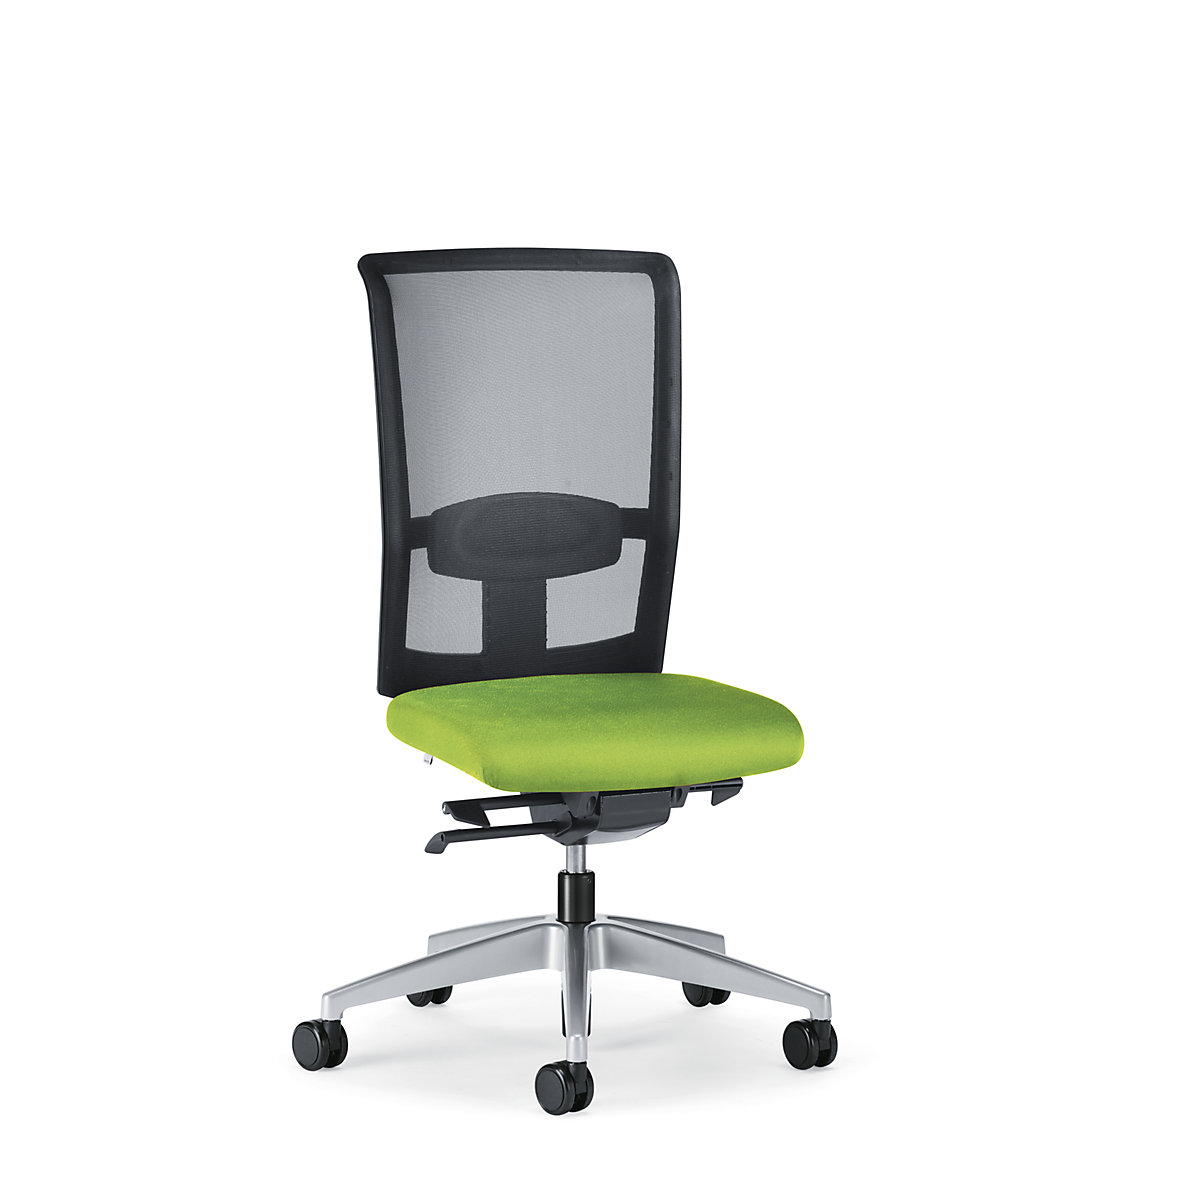 GOAL AIR office swivel chair, back rest height 545 mm – interstuhl, brilliant silver frame, with hard castors, yellow green, seat depth 410 mm-5